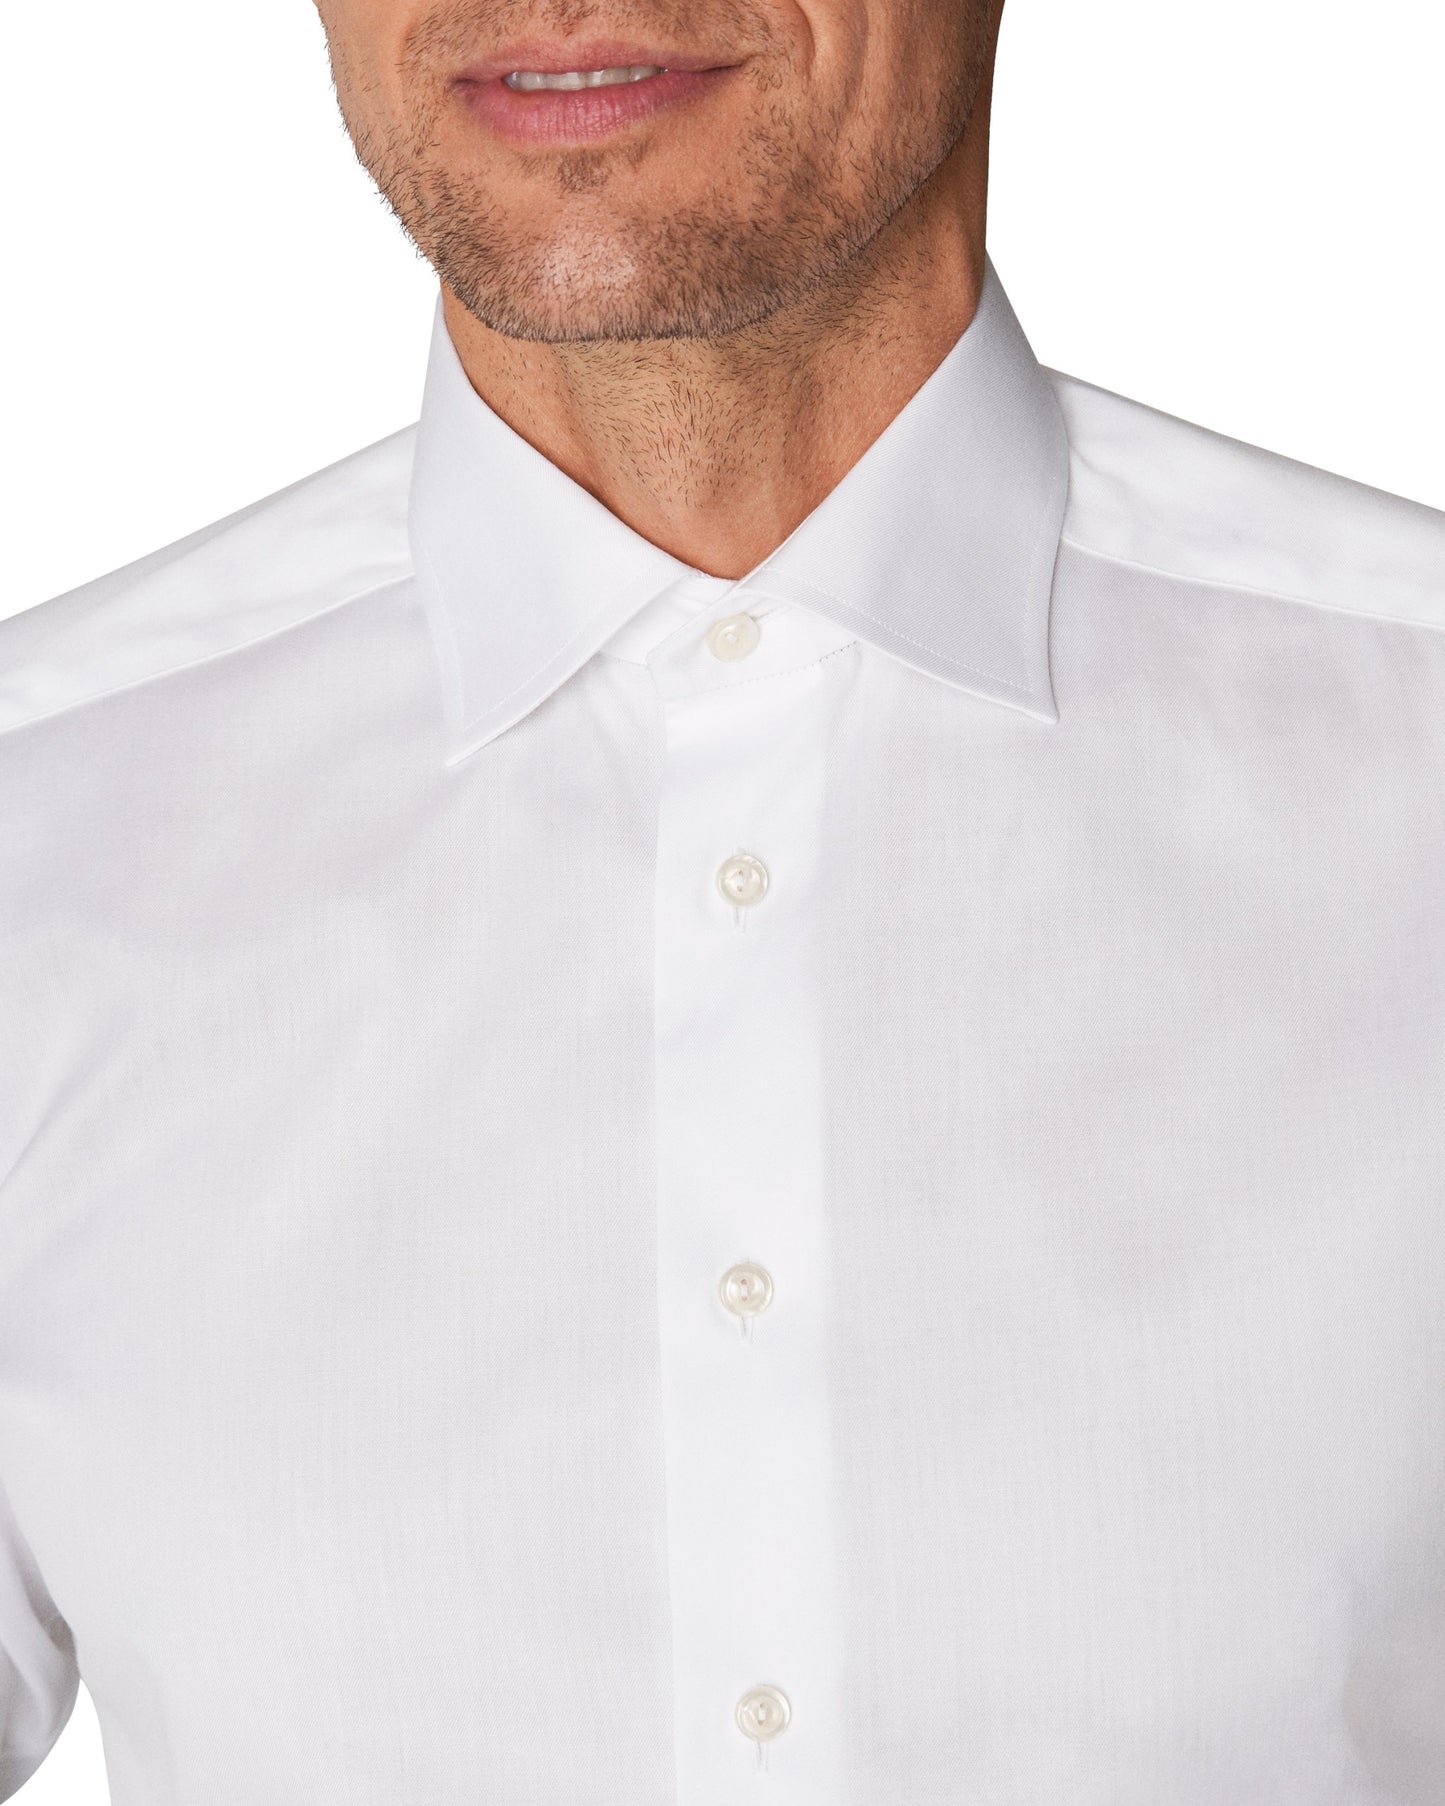 Eton L/S Business Shirt - Signature Twill in Contemporary Fit with French Cuffs